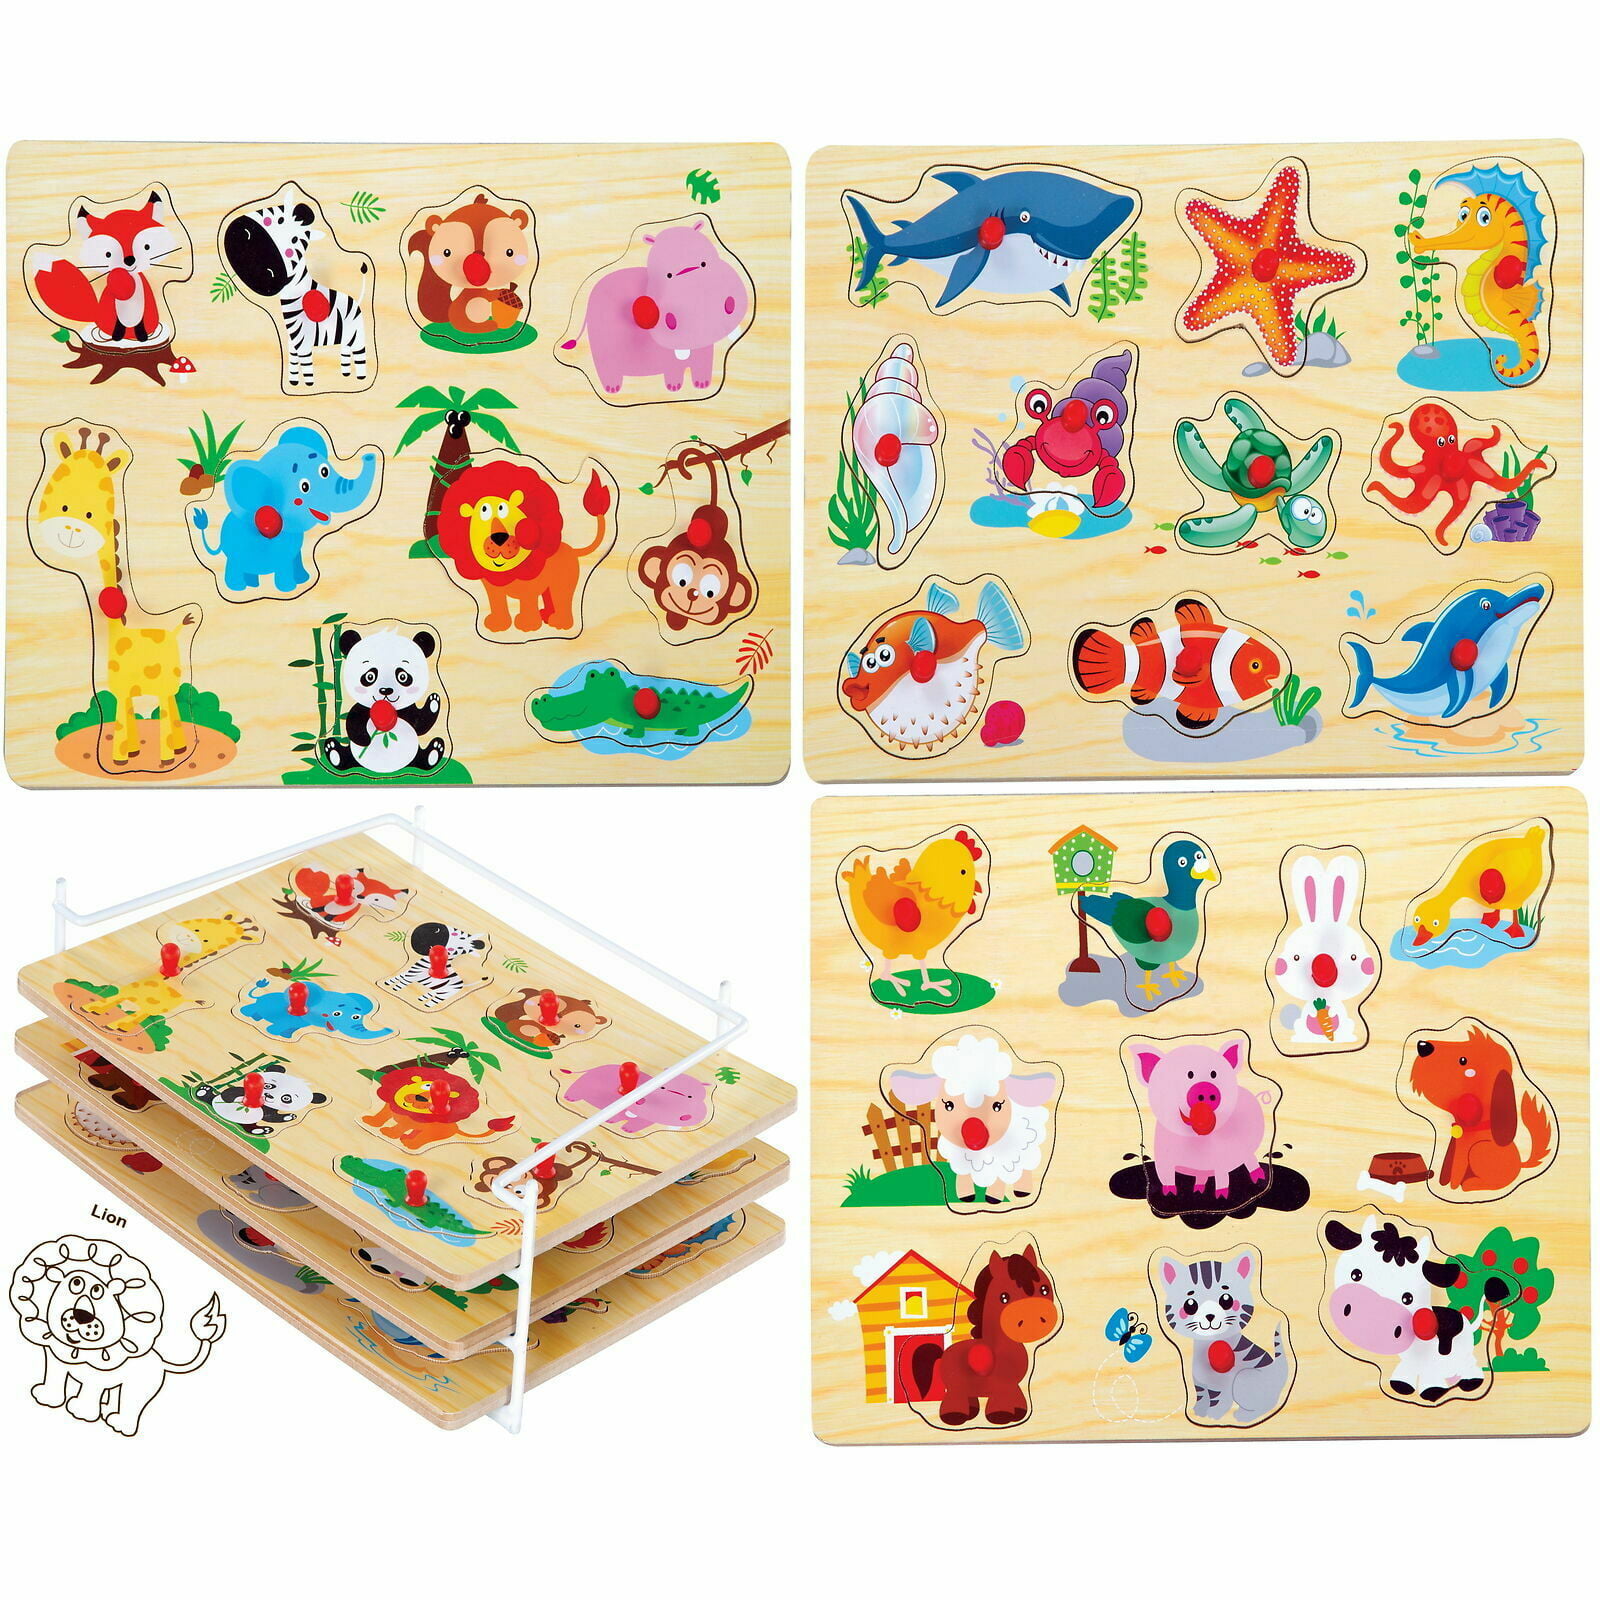 FARM ANIMALS 9 pc Shaped Peg Wood Puzzle 11.5x8.5 Educational Toy Wooden Age 3+ 